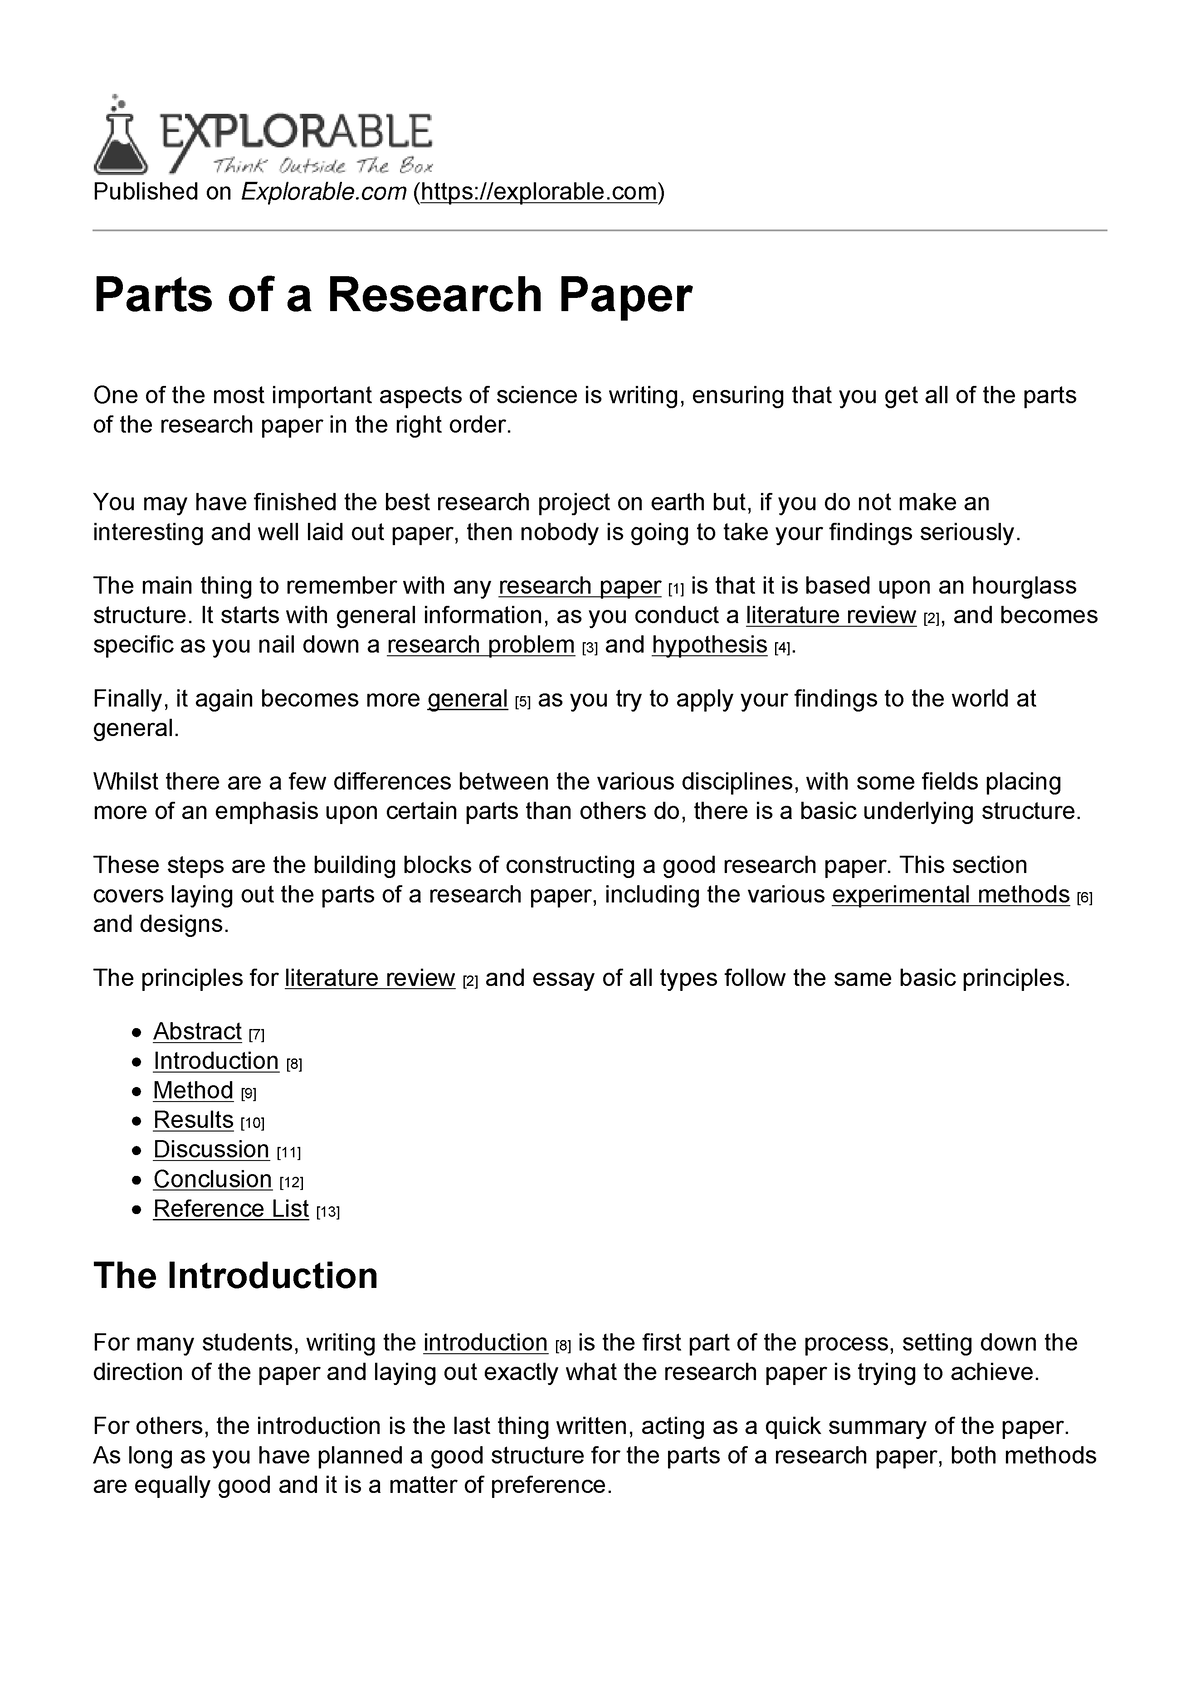 what are the parts of a mini research paper